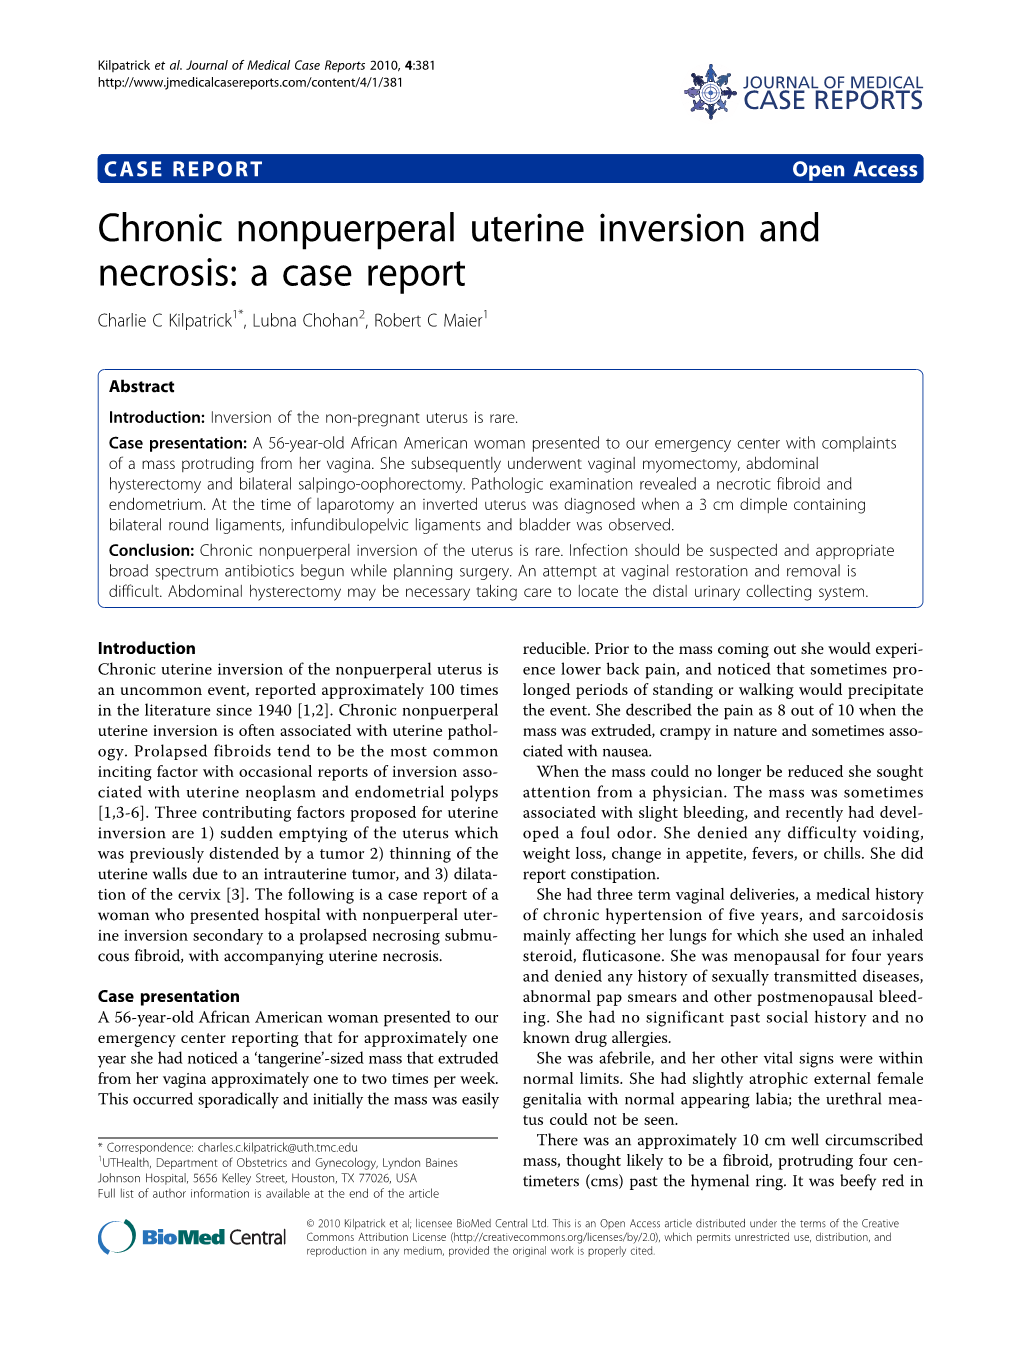 Chronic Nonpuerperal Uterine Inversion and Necrosis: a Case Report Charlie C Kilpatrick1*, Lubna Chohan2, Robert C Maier1